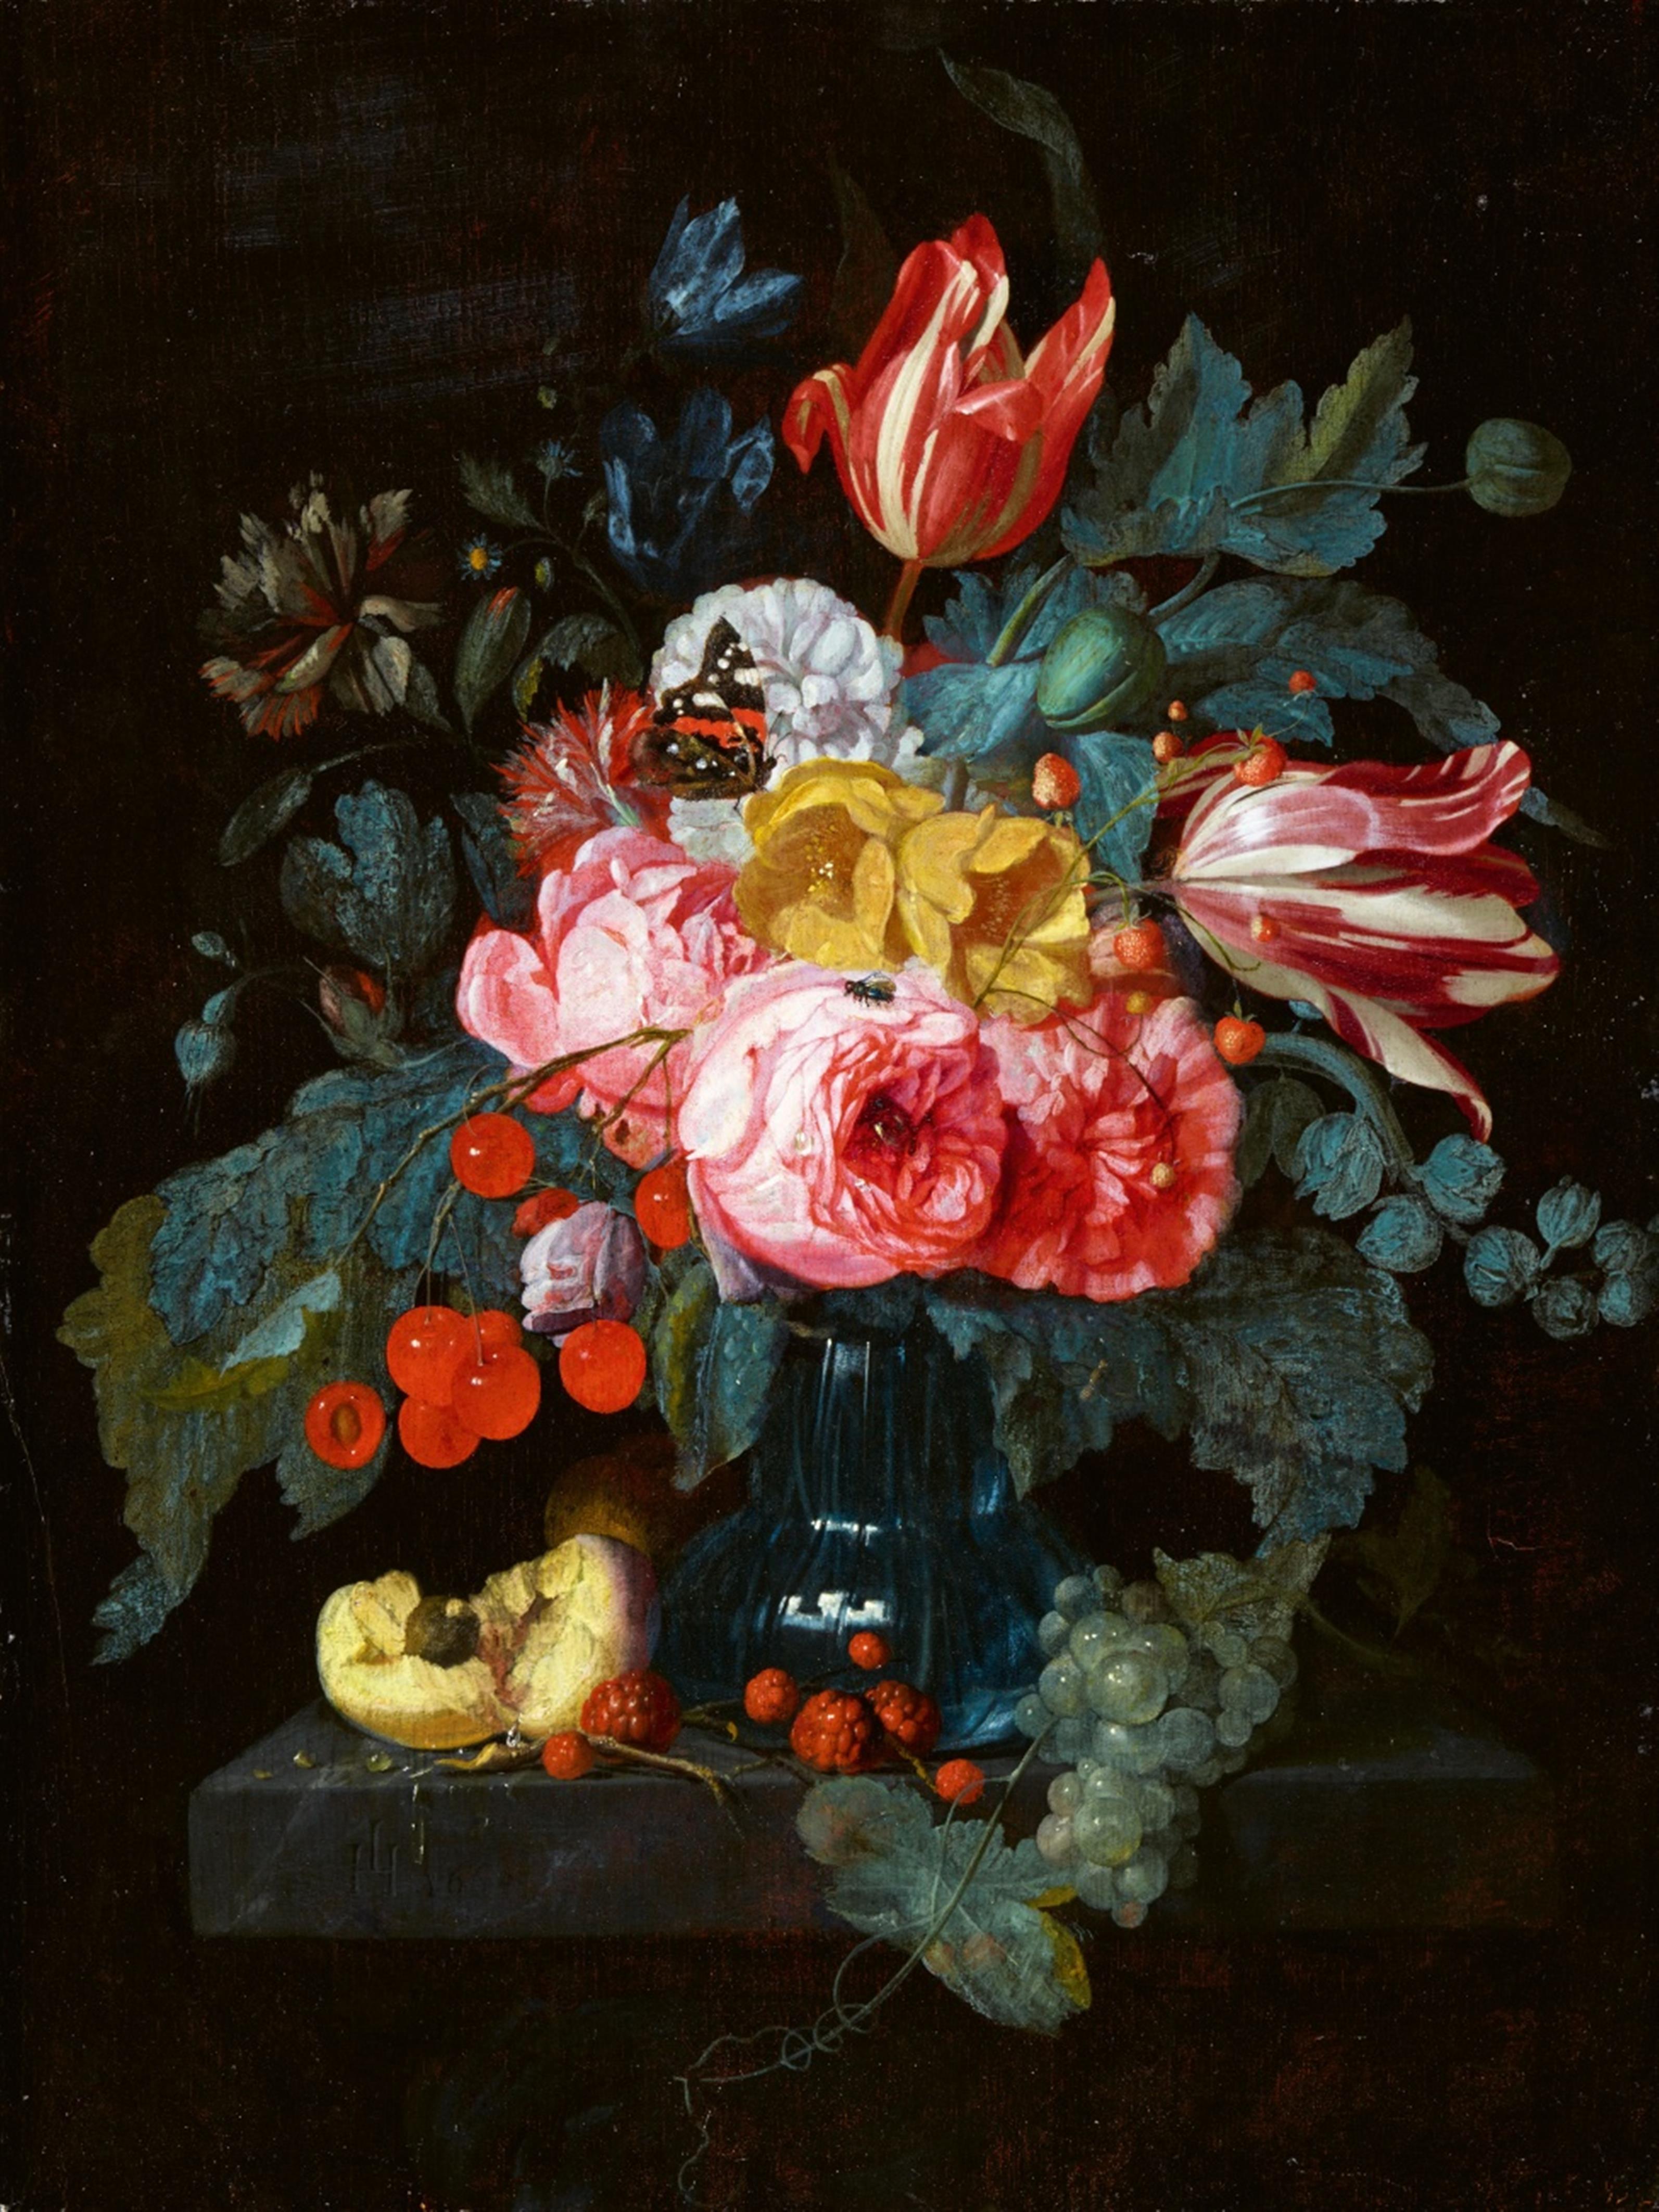 Johannes Hannot - Flower Still Life with Roses and Tulips in a Glass Vase on a Stone Slab - image-1